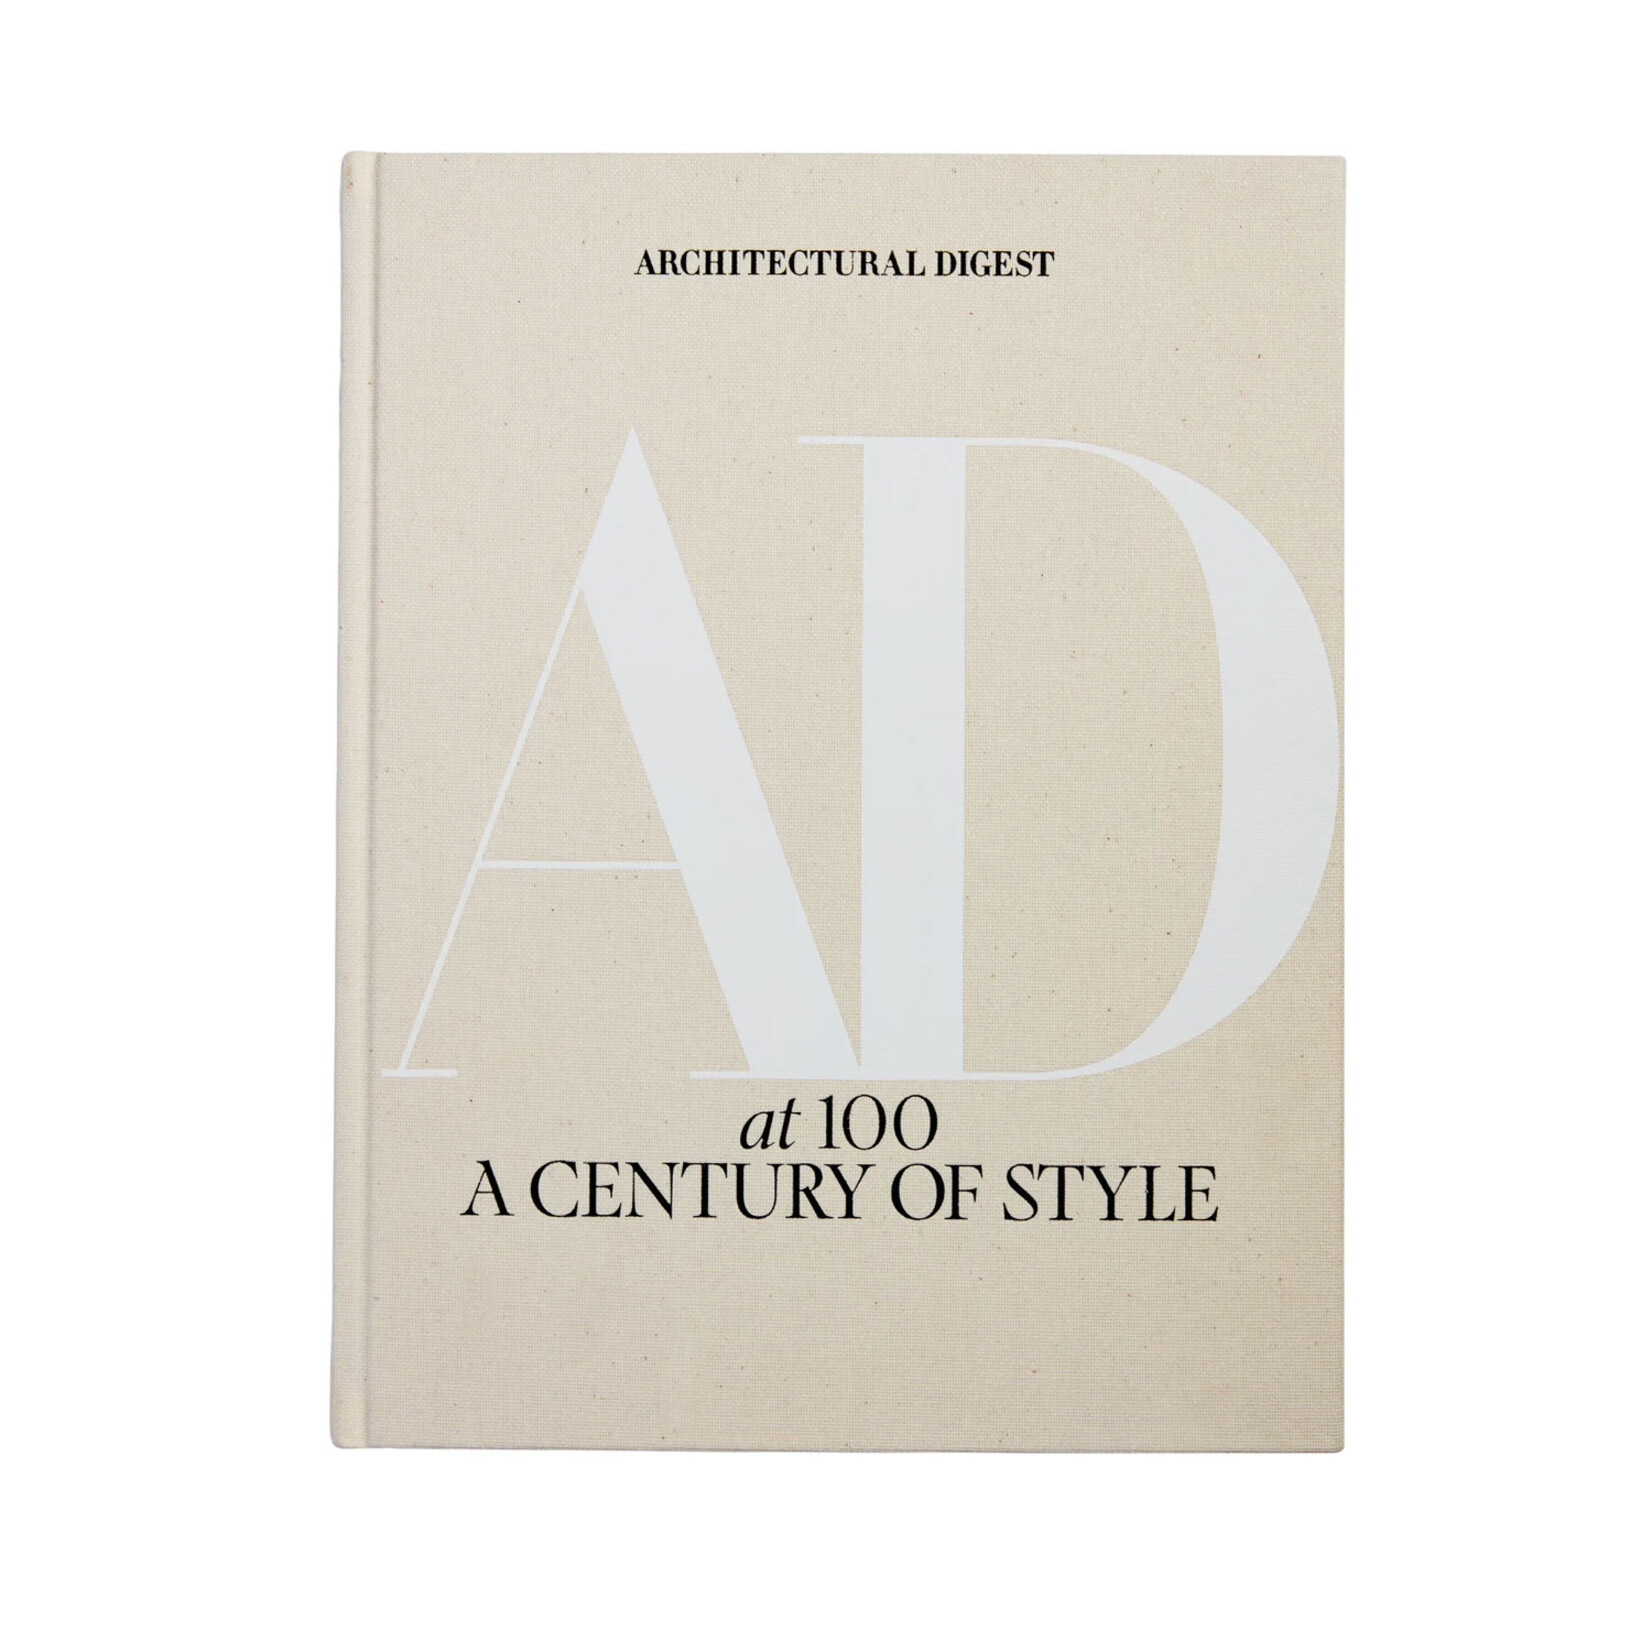 Architectural Digest at 100, A Century of Style